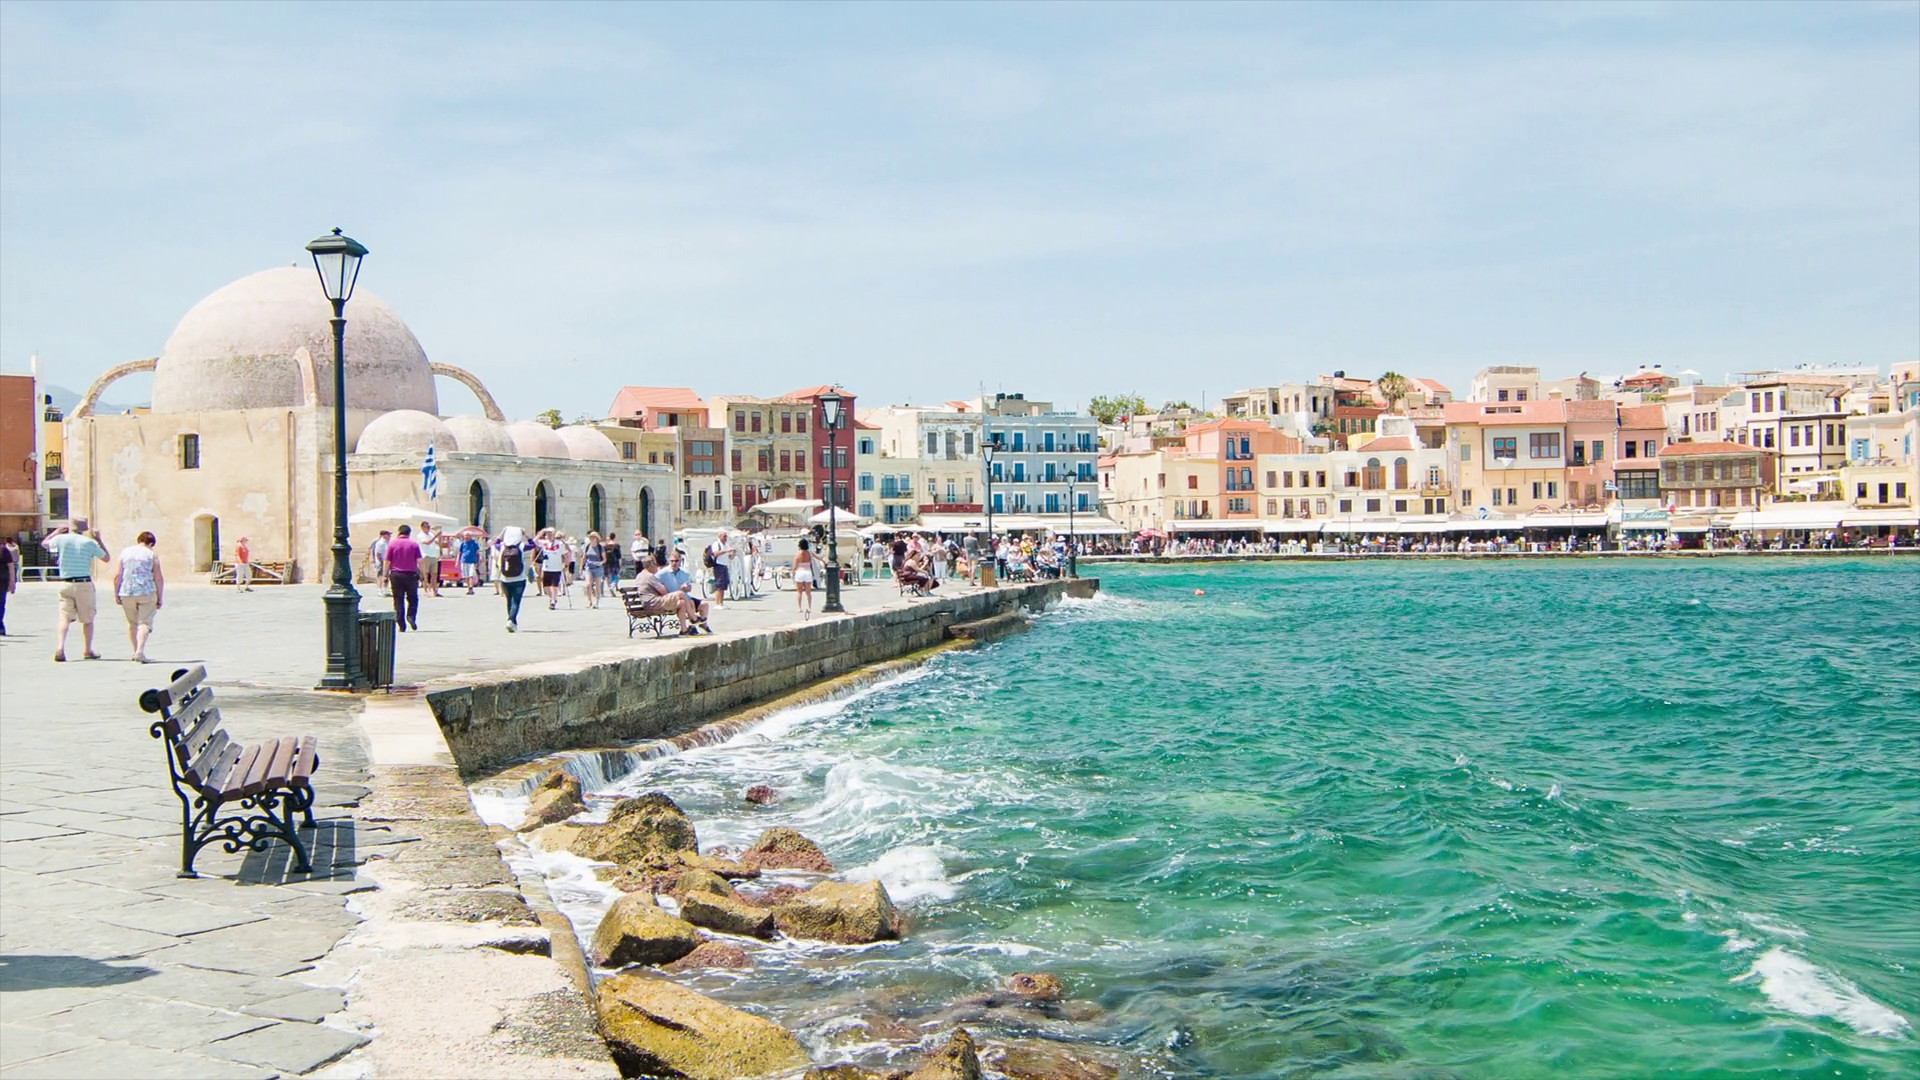 Chania Crete Greece Old Town Square with Sightseeing Tourists and ...